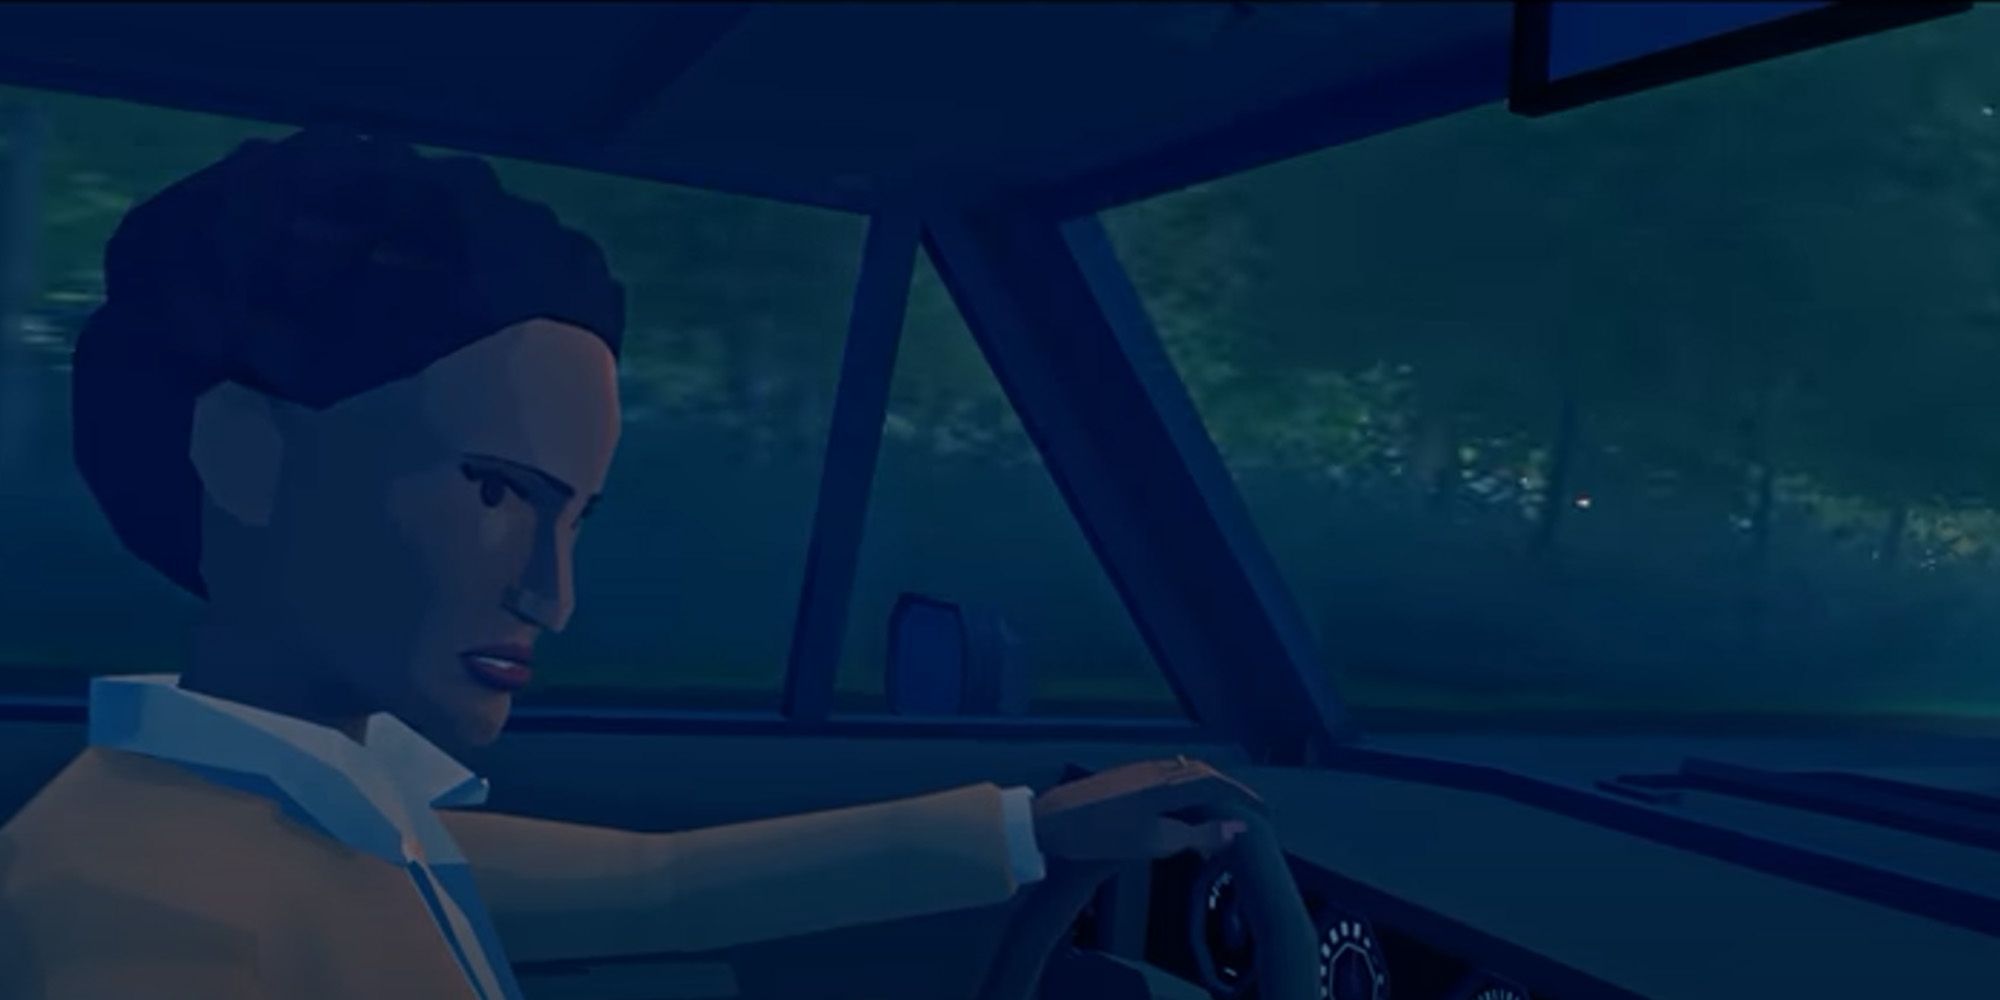 screenshot from the game Virginia featuring the  main character Anne Tarver